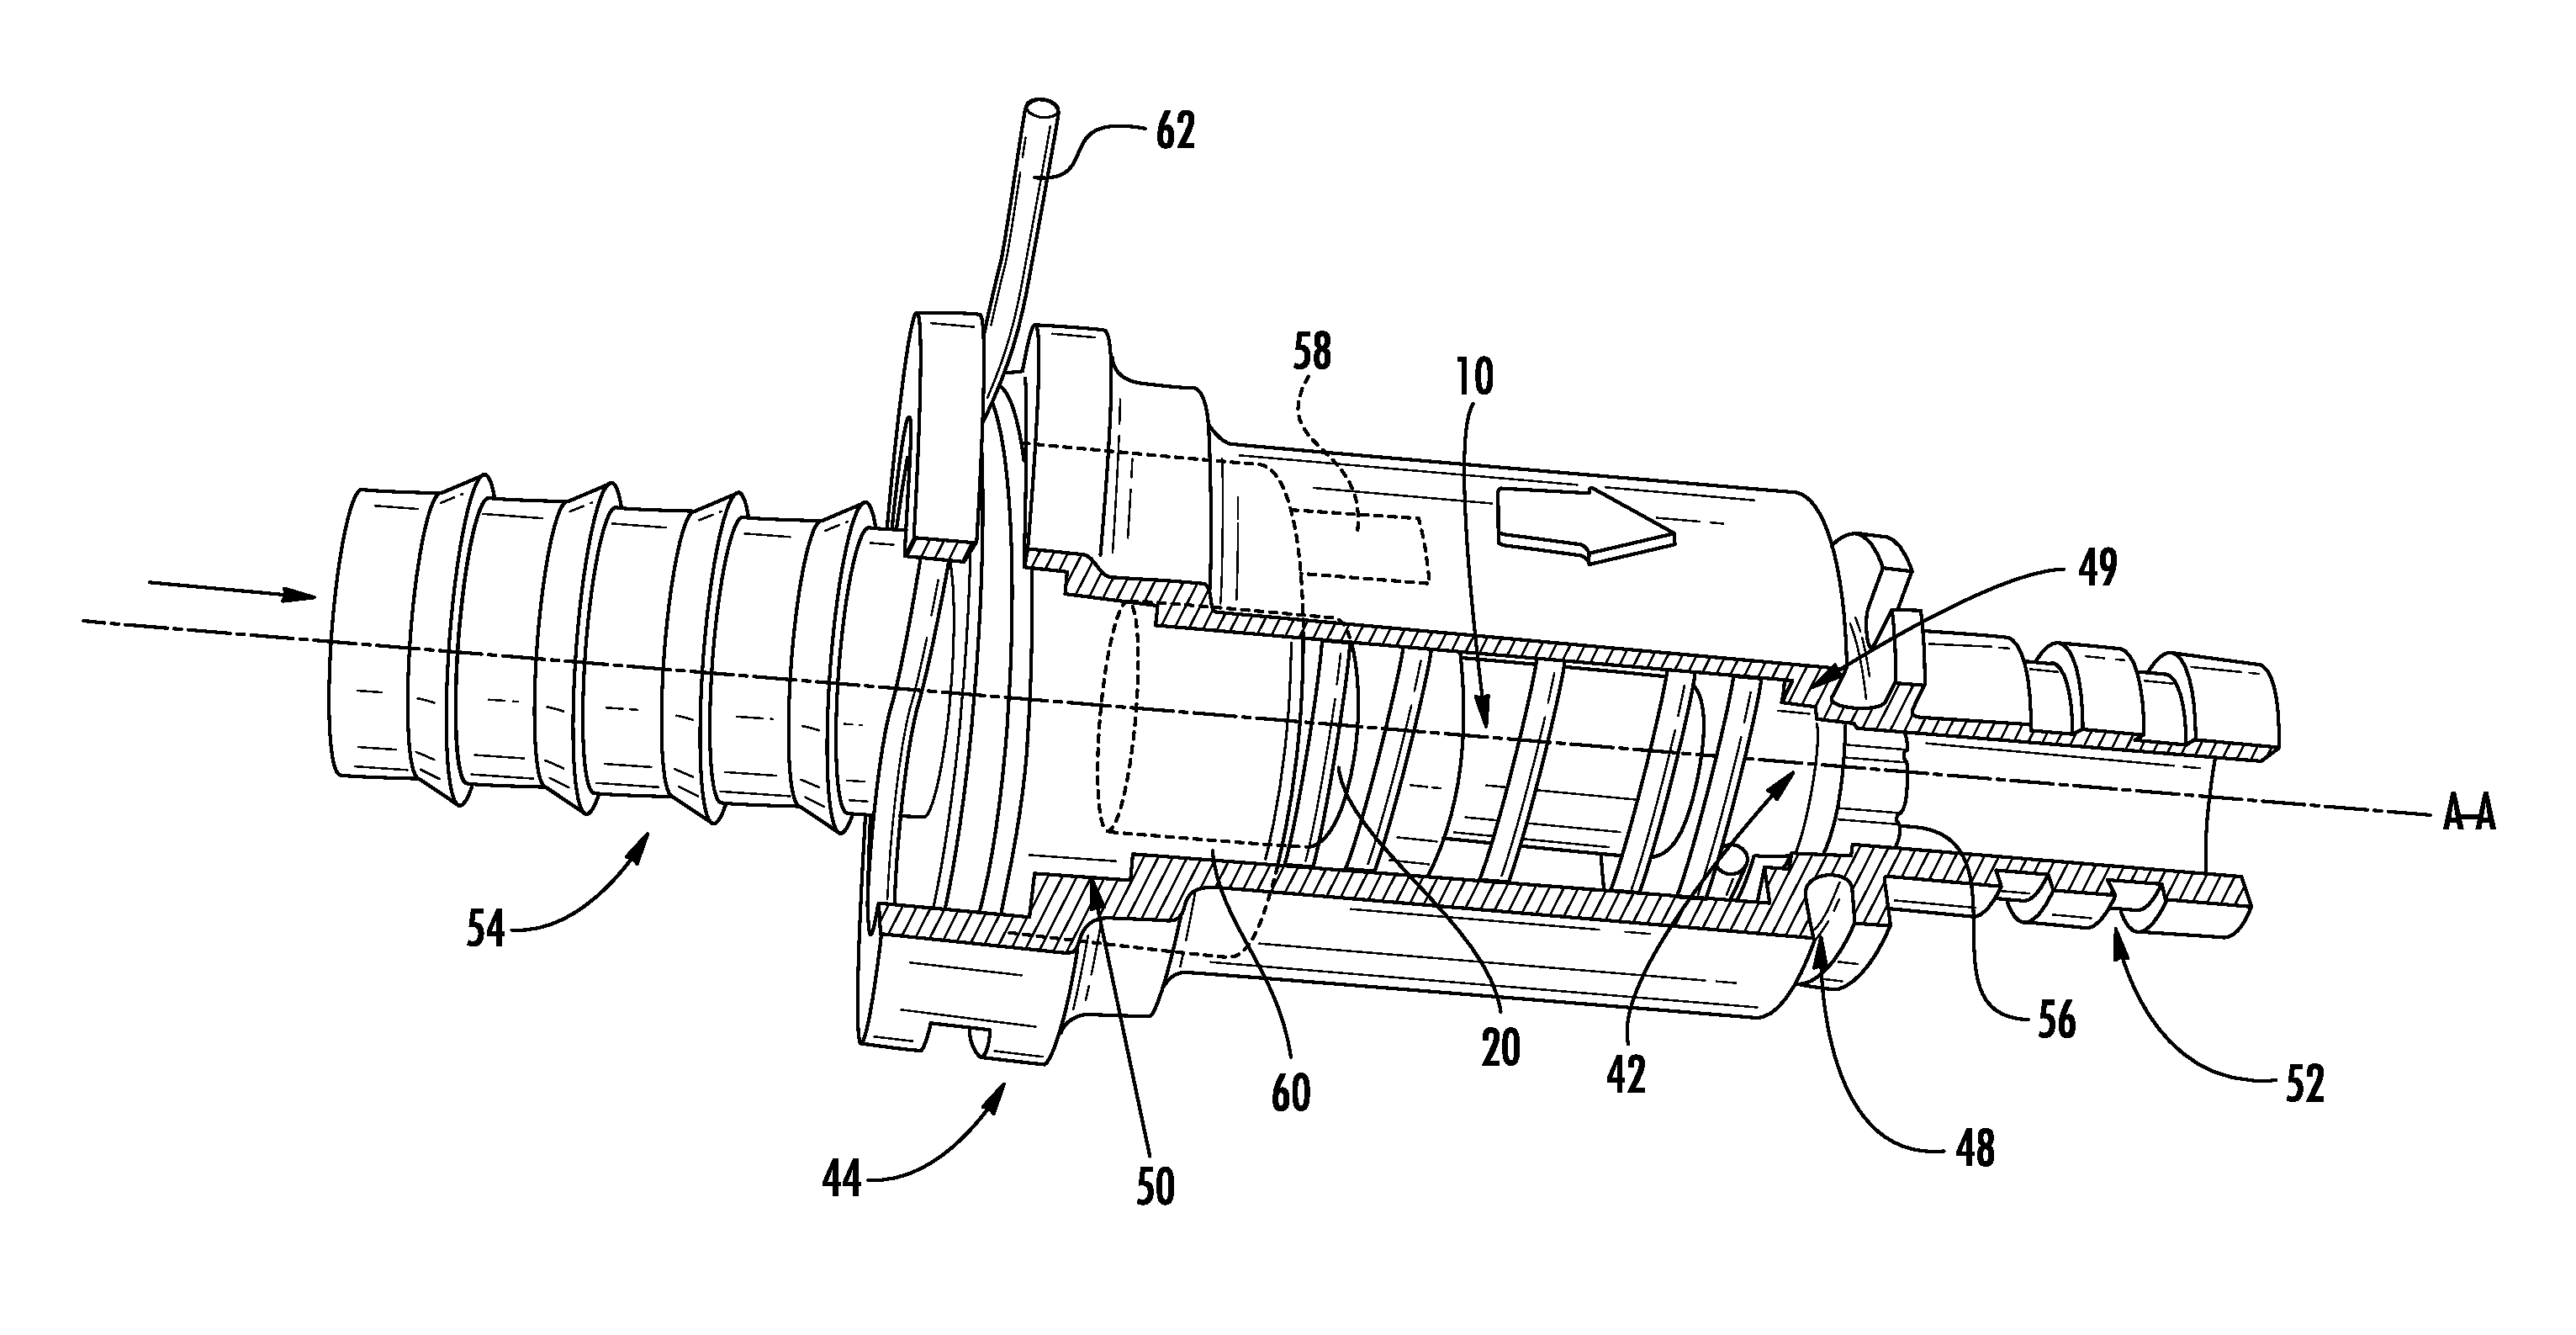 Thermally Actuated Power Element with Integral Valve Member